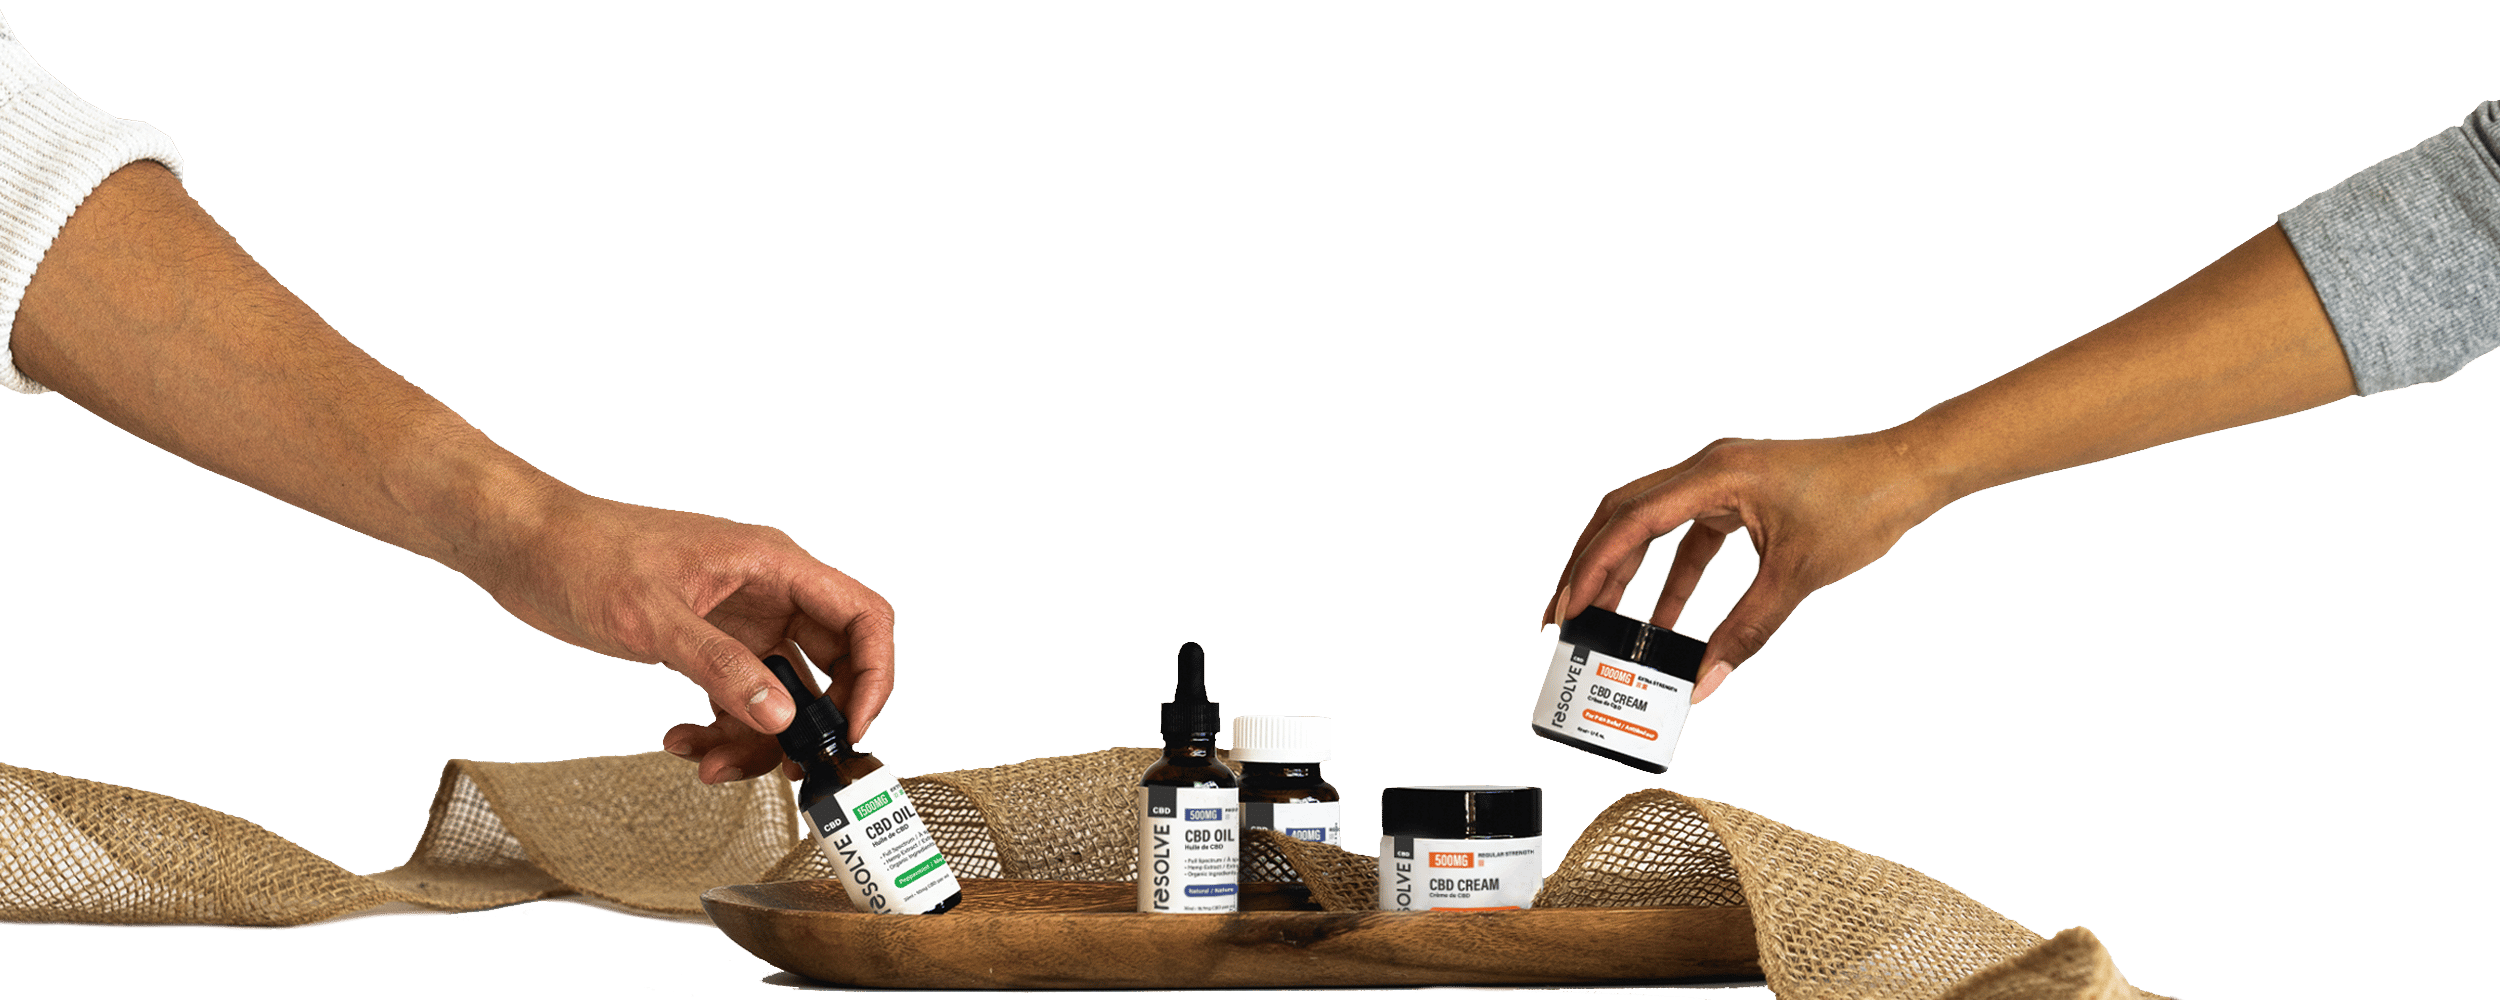 Resolve CBD products on a plate with hands reaching out to gram them